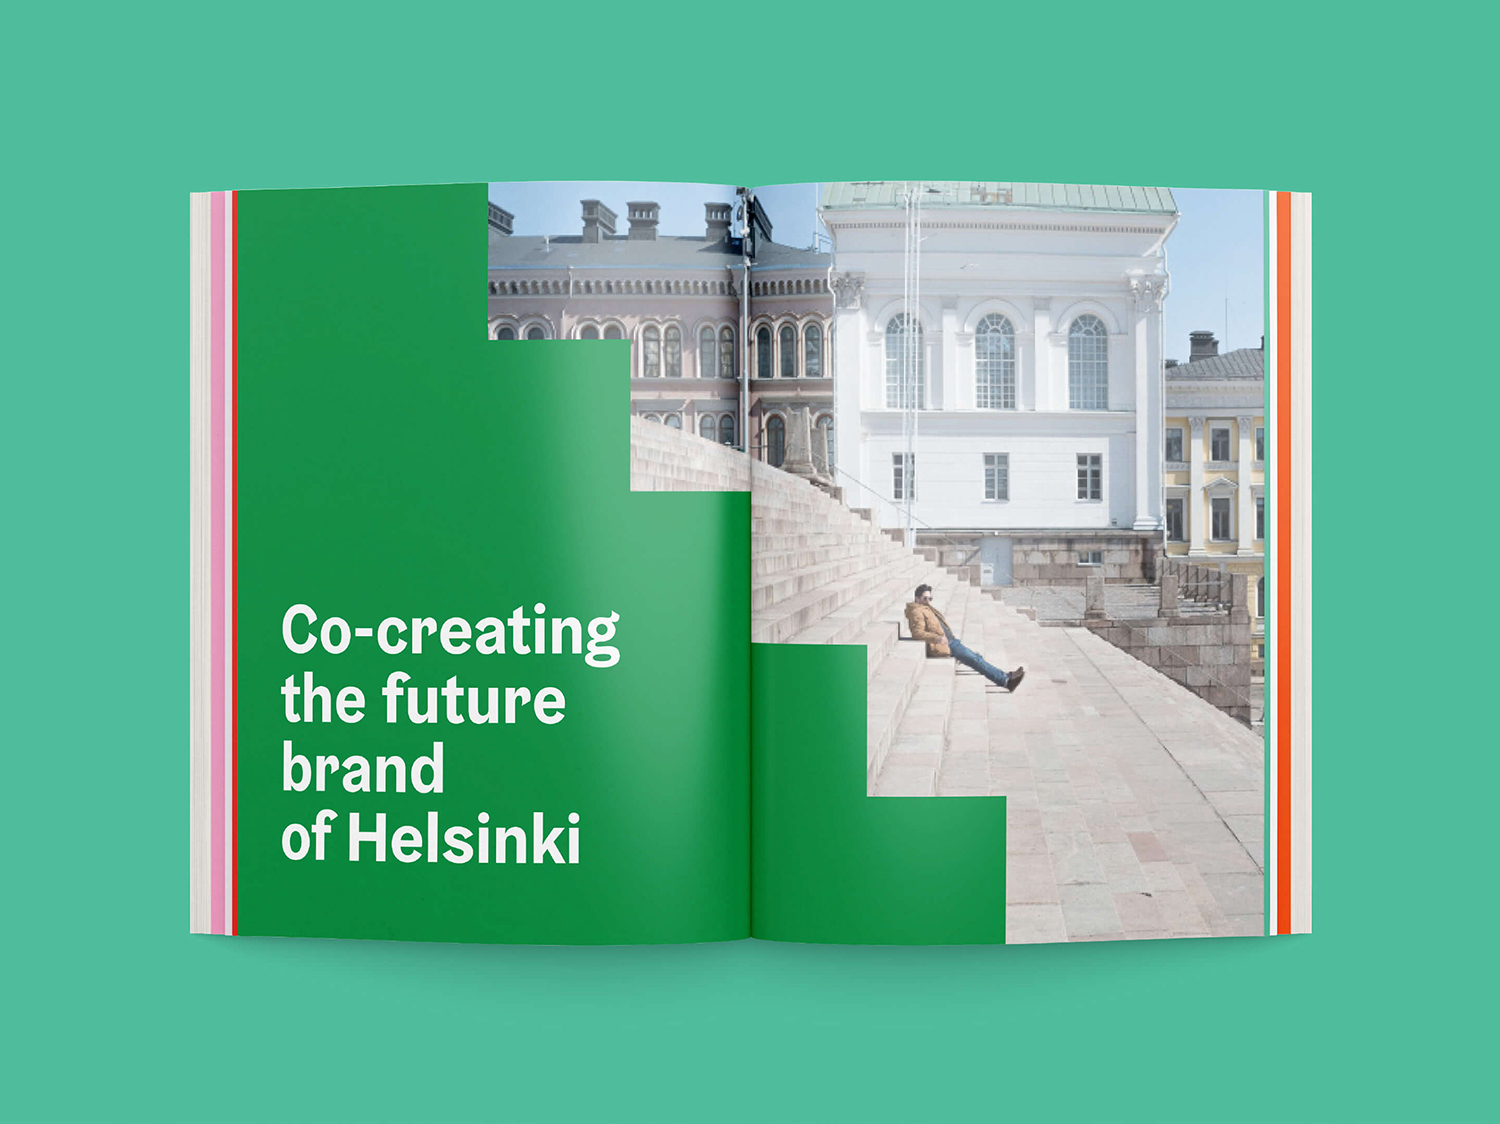 Logo and visual identity system designed by Werklig for the Finnish city of Helsinki